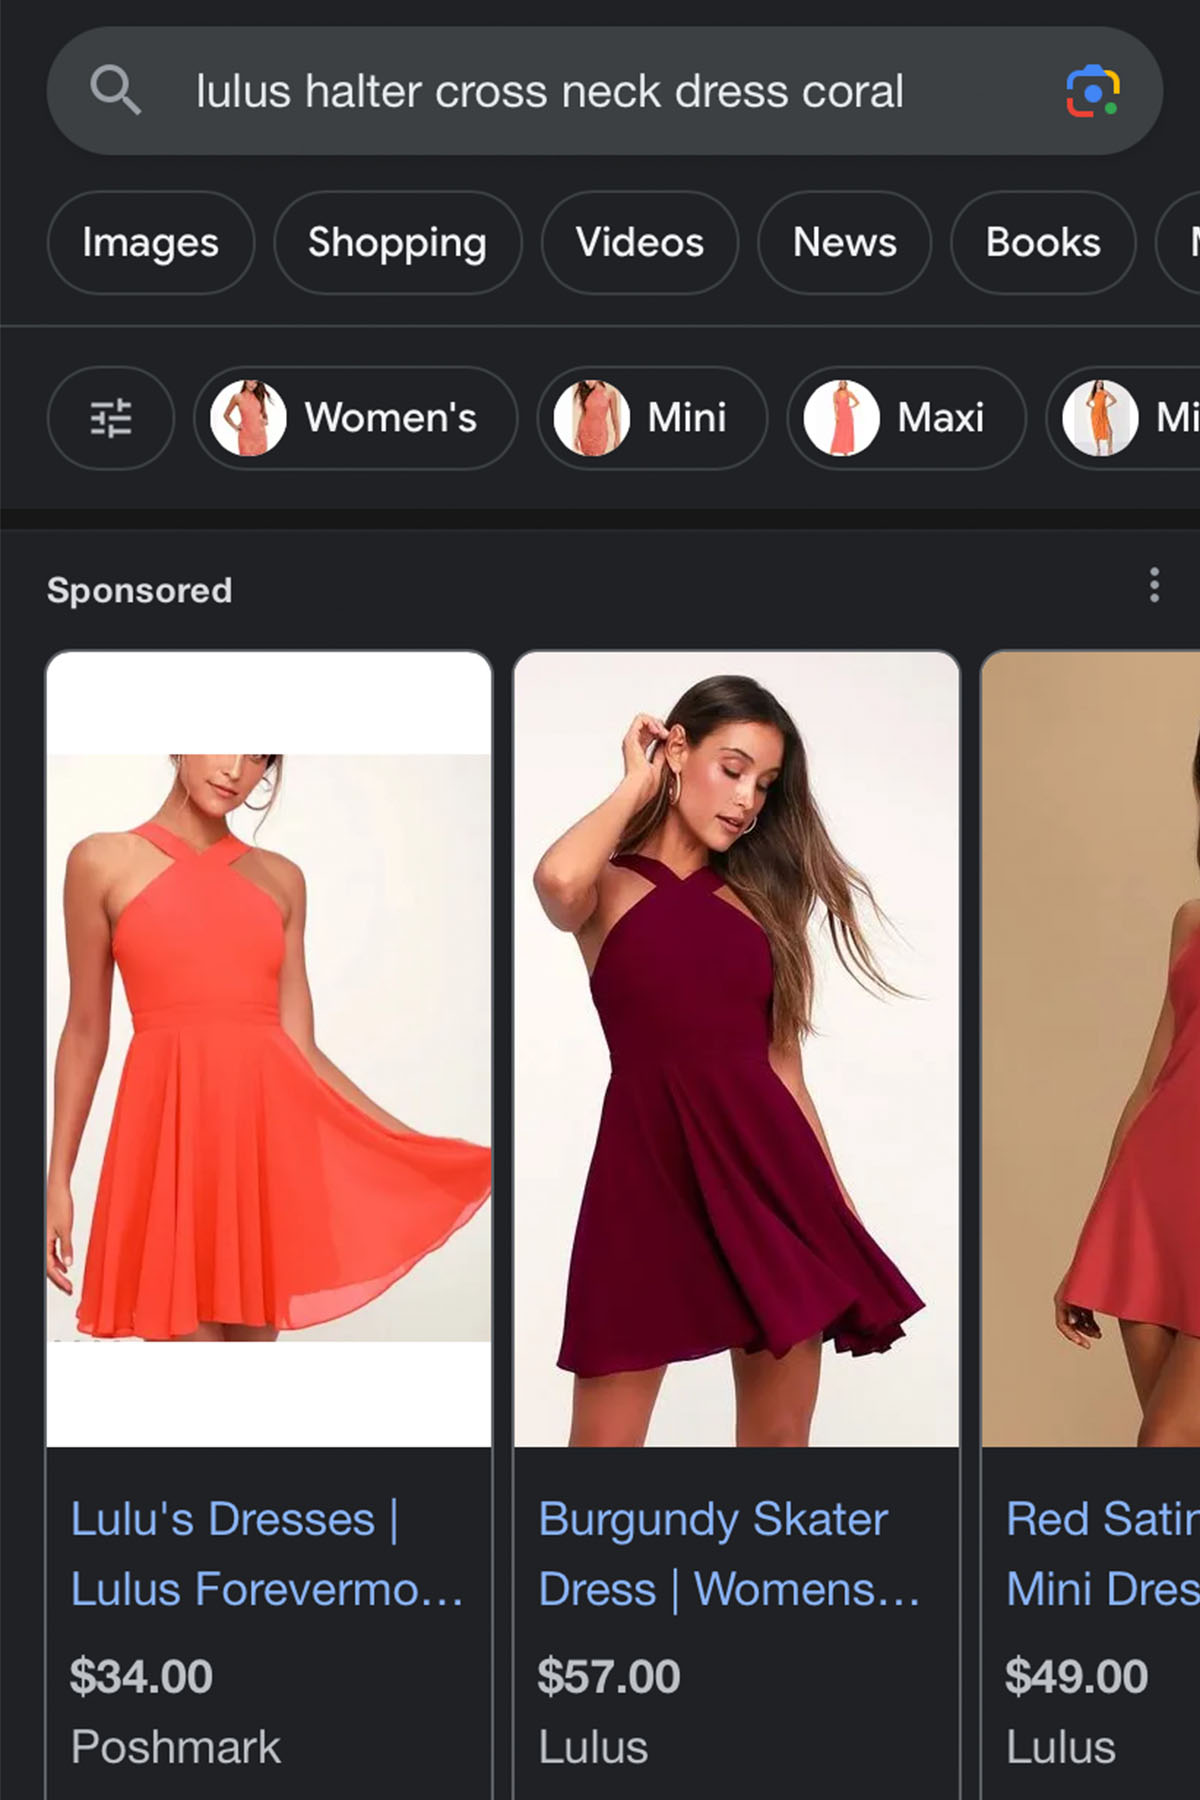 screenshot of a google search result for a lulus dress.